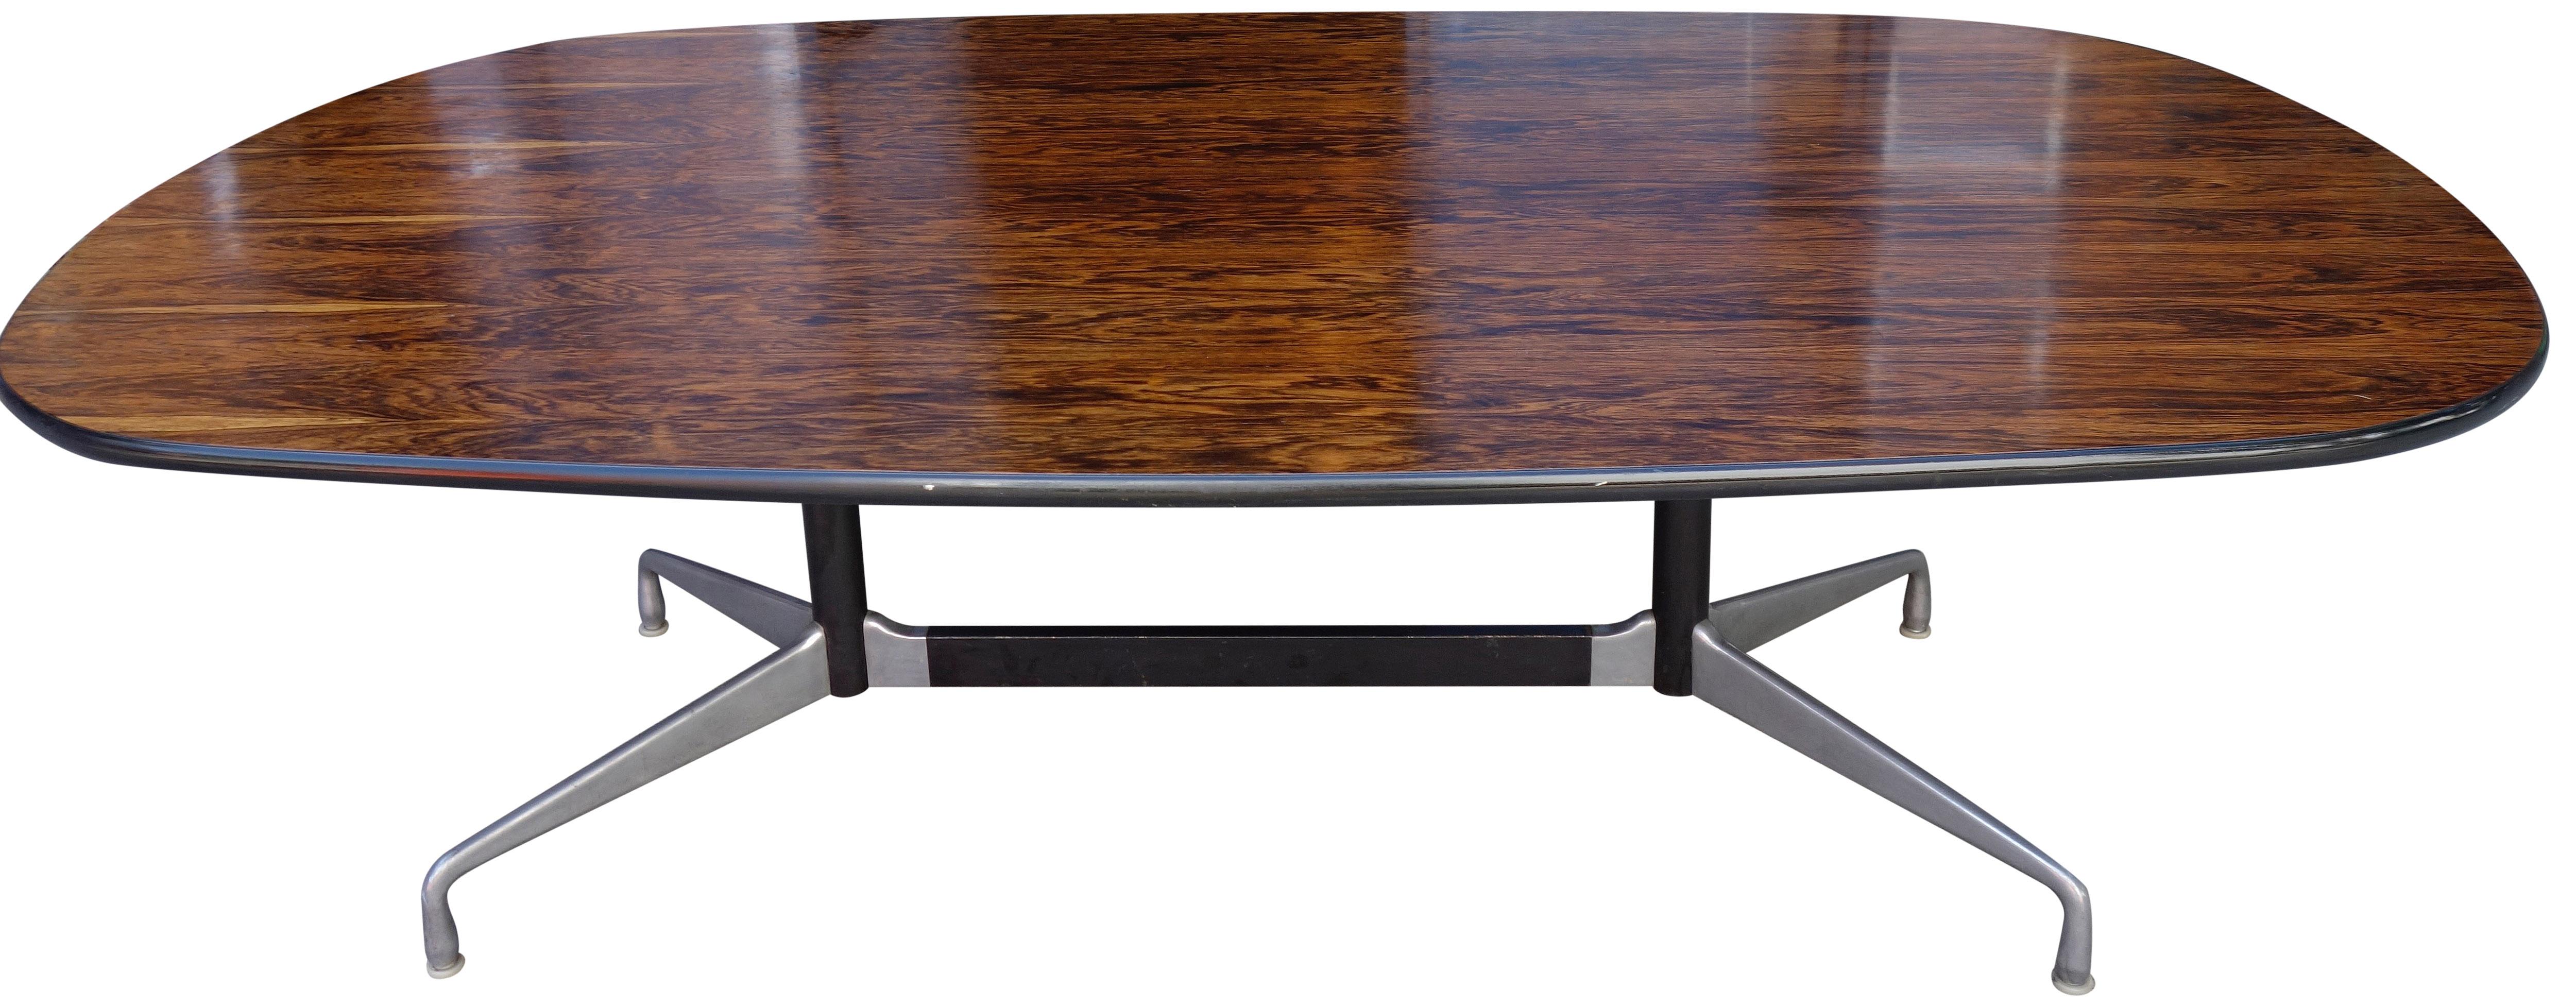 Midcentury Segmented Base Table by Eames for Herman Miller 3